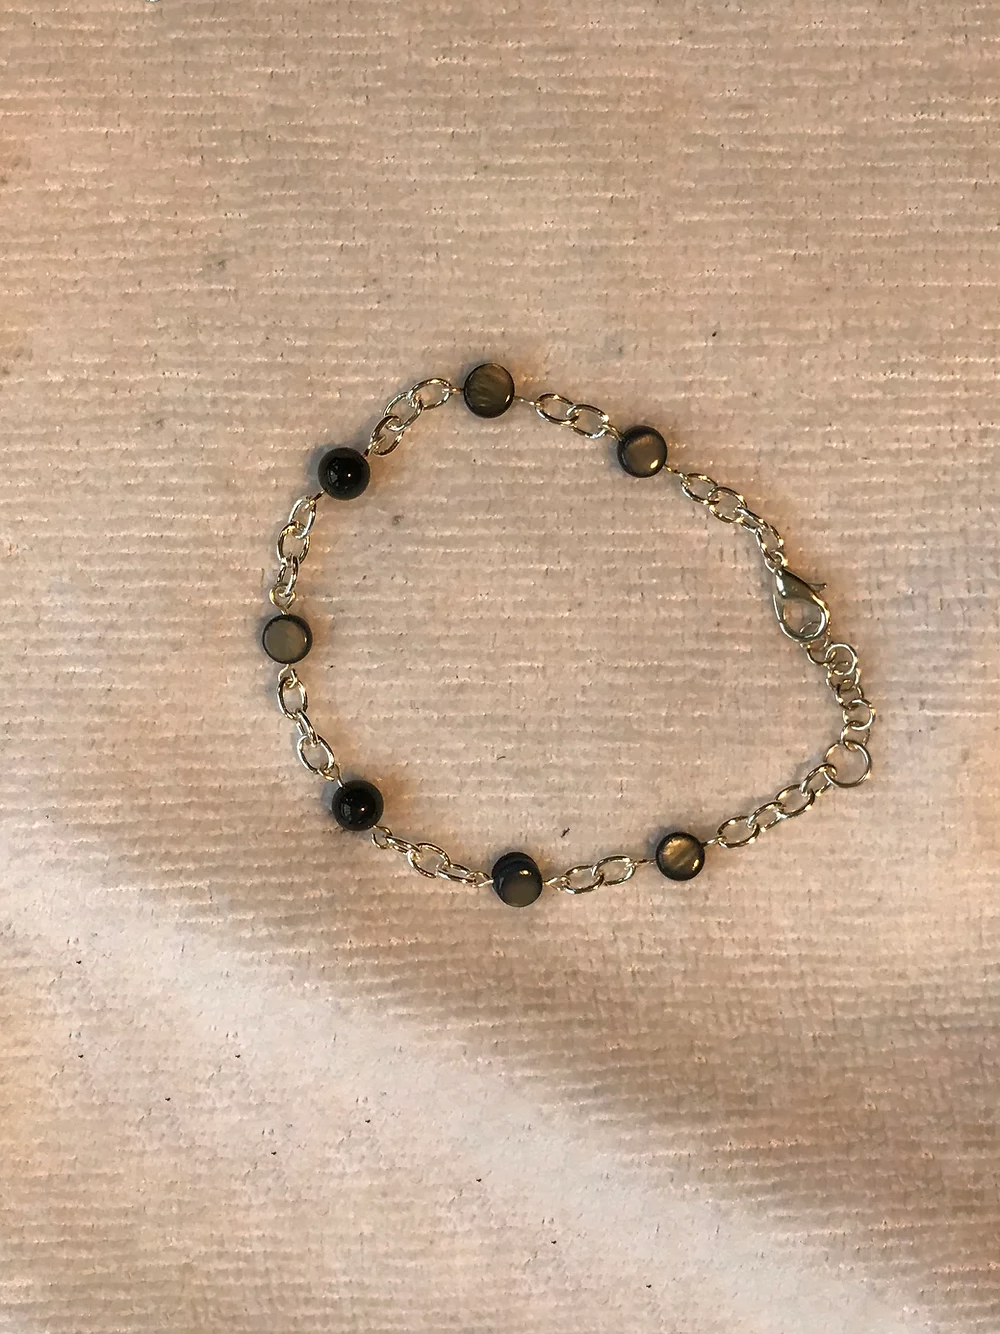 Beaded Bracelet with Silver Chain